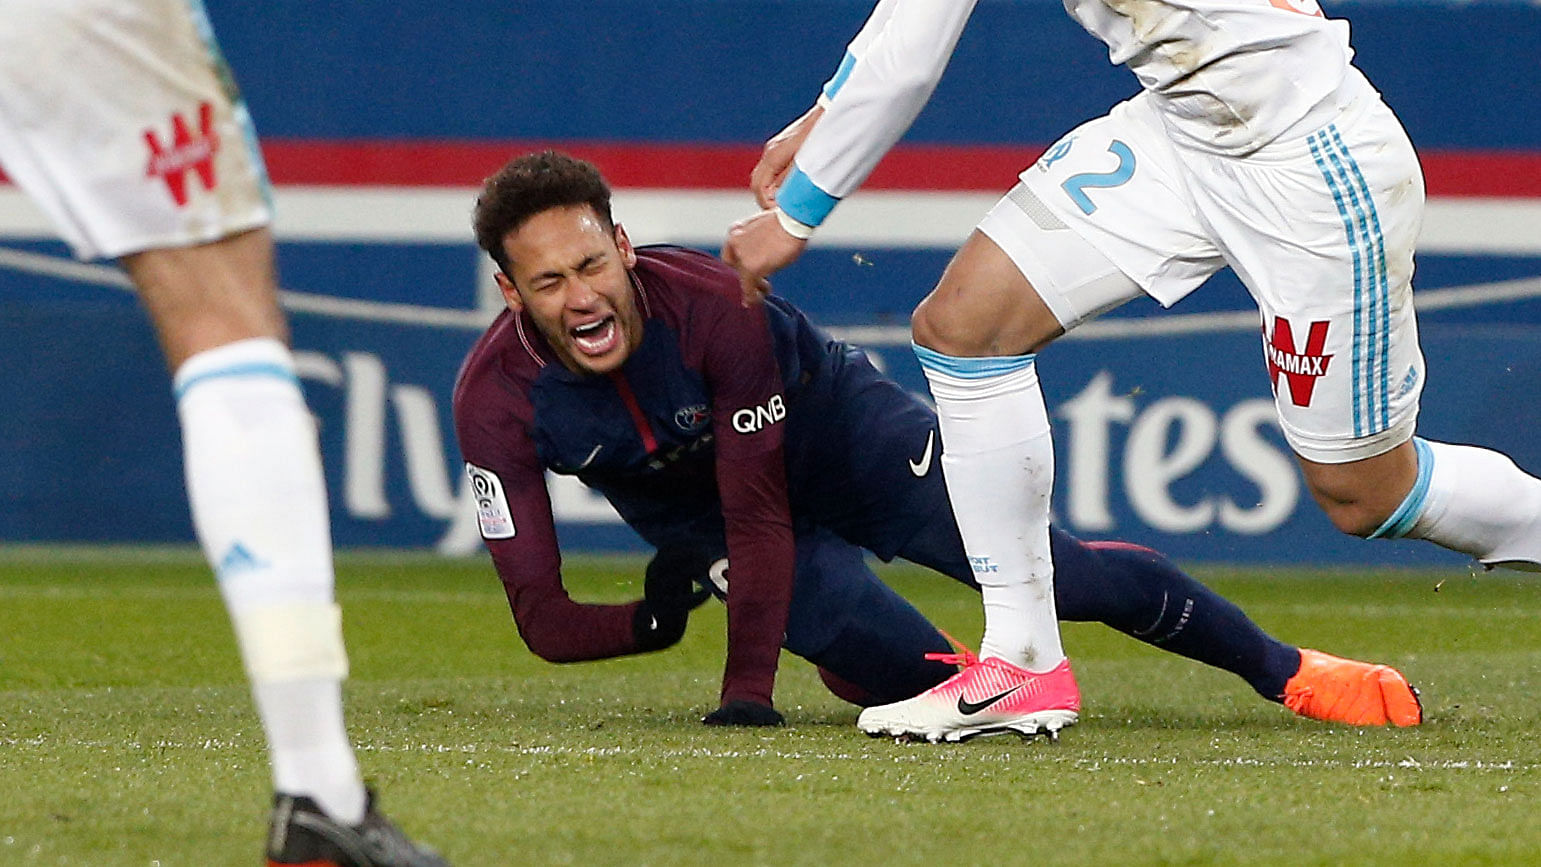 Tests have revealed that Neymar has a cracked fifth metatarsal in his right foot along with a sprained ankle.